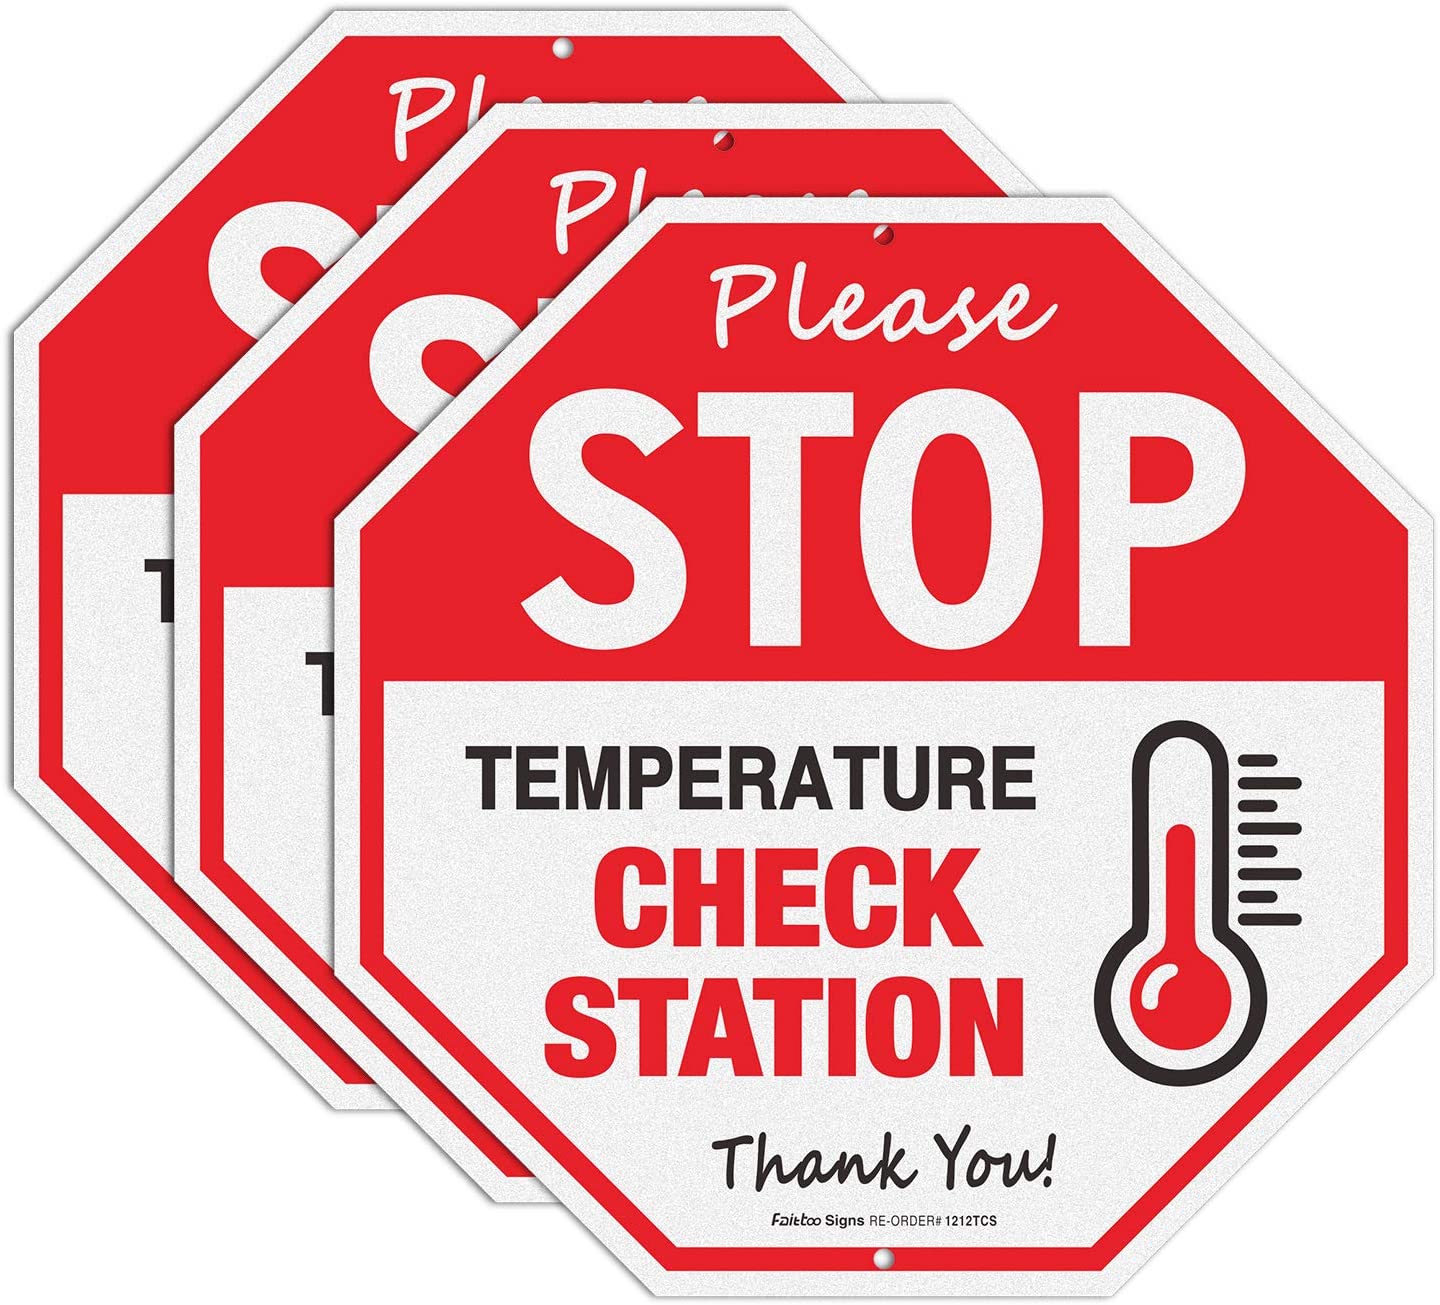 Stop Temperature Check Station Sign,12x12 Inch Octagon Rust Free Aluminum Metal Sign, Reflective, Weather/Fade Resistant,Easy to Mount,Indoor/Outdoor Use